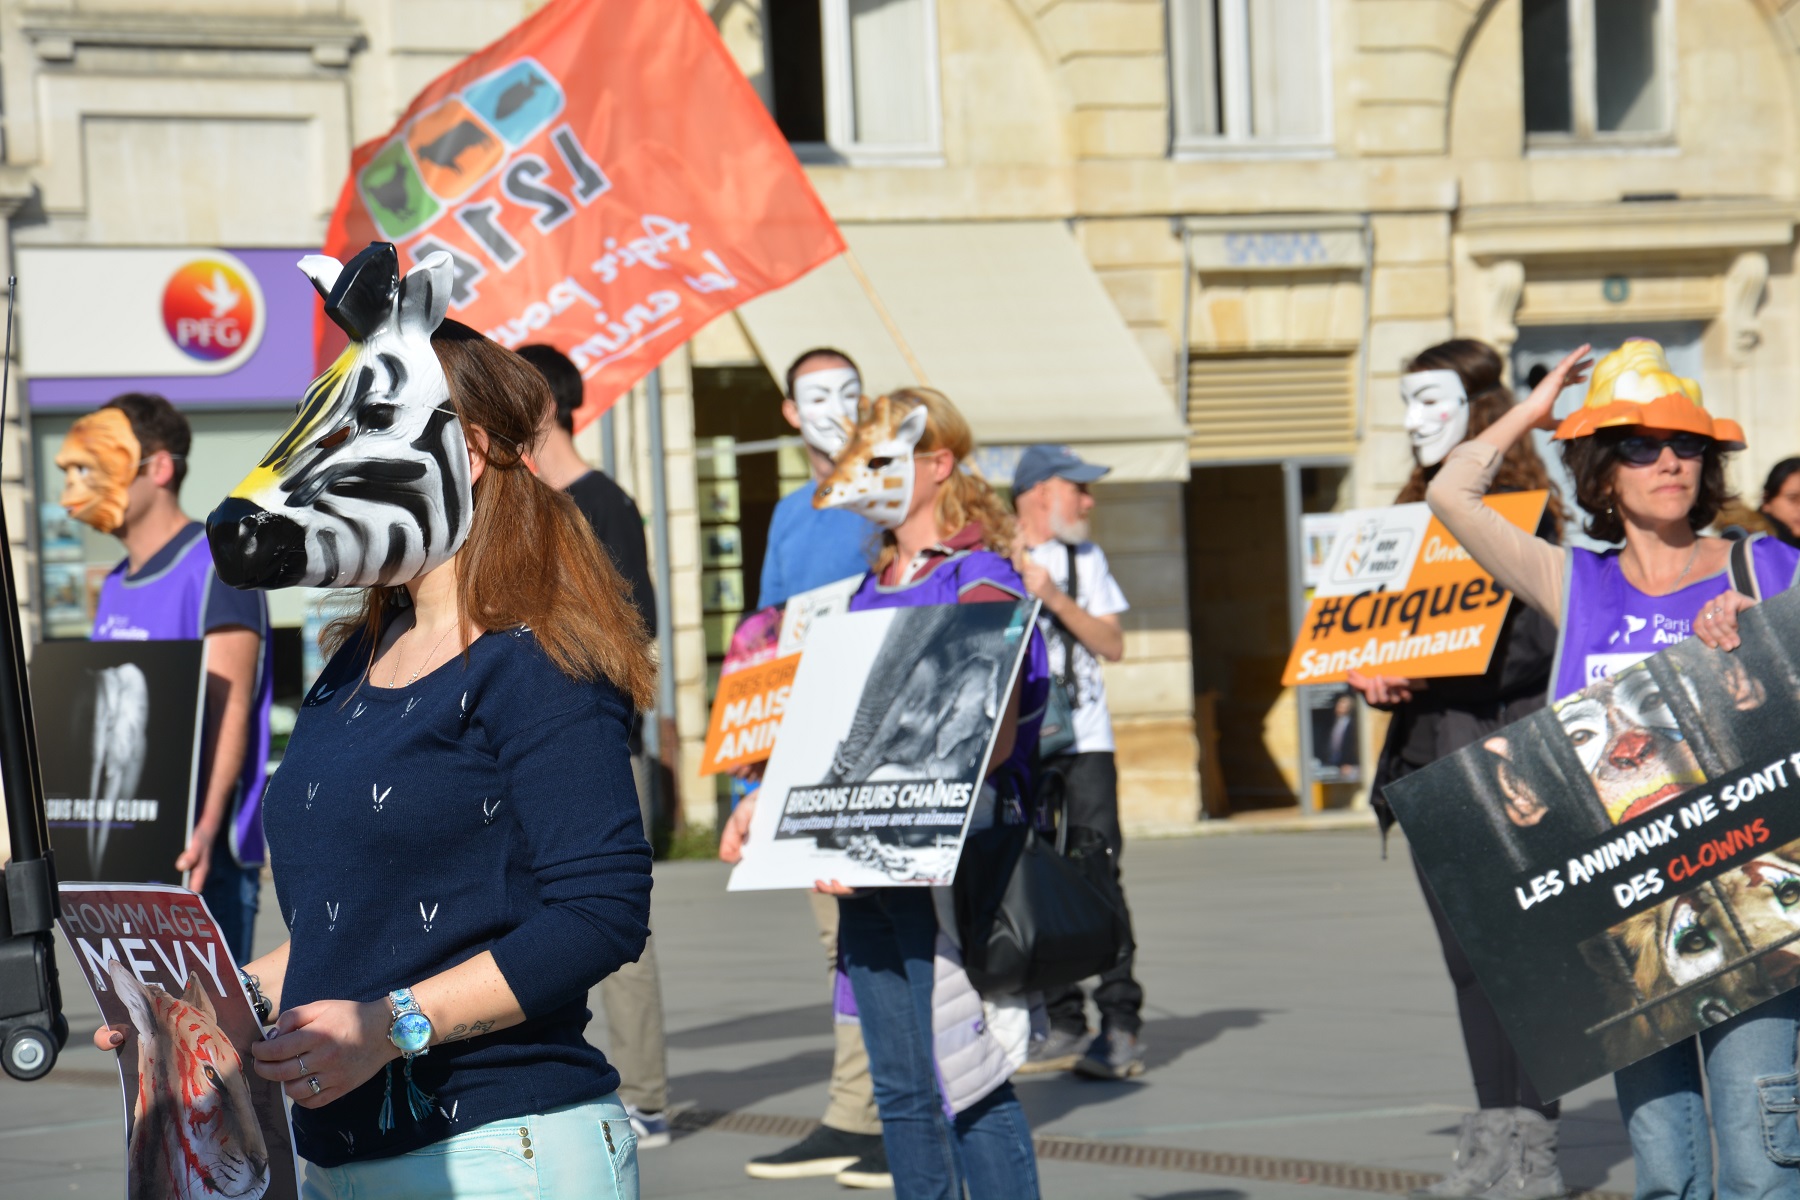 manifestation_mairie_bordeaux_animaux_cirques_triangle3